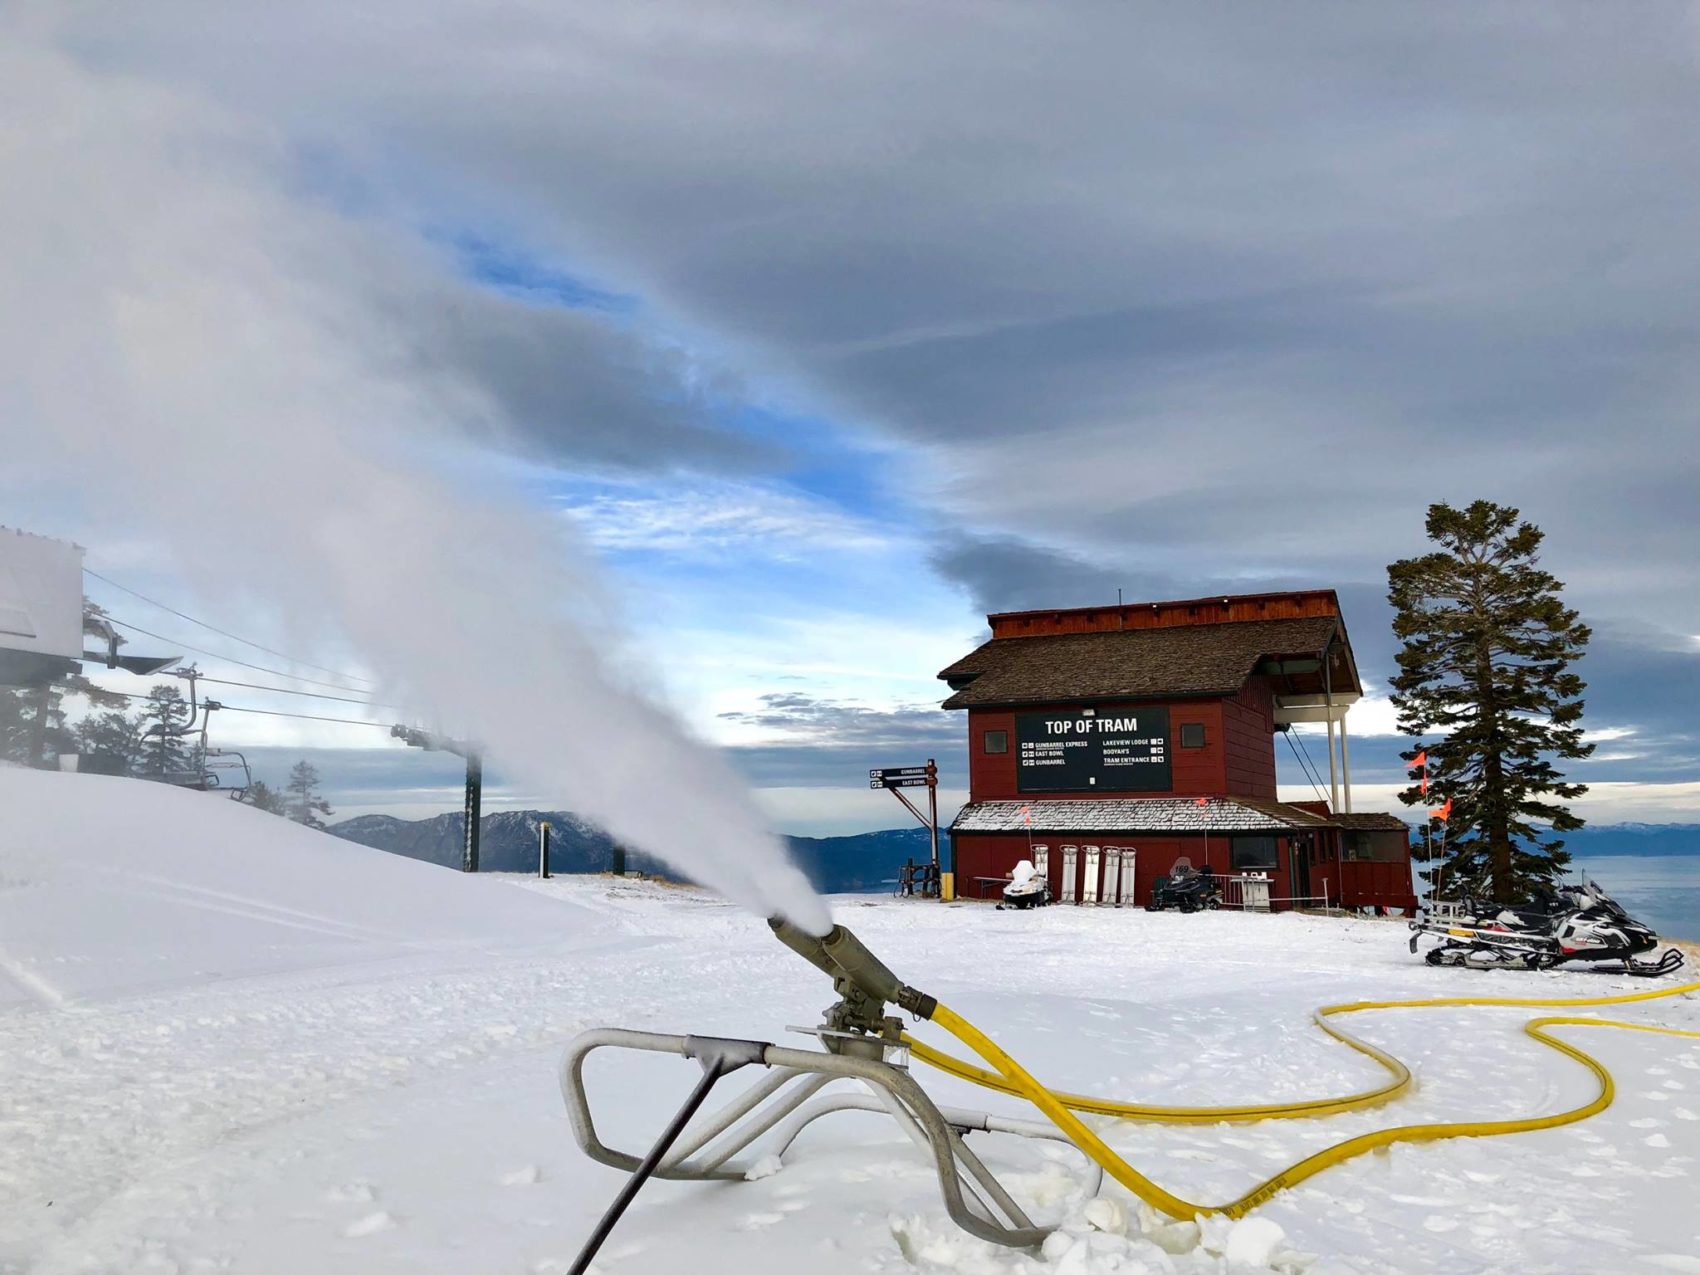 Snow gun at the top of the tram